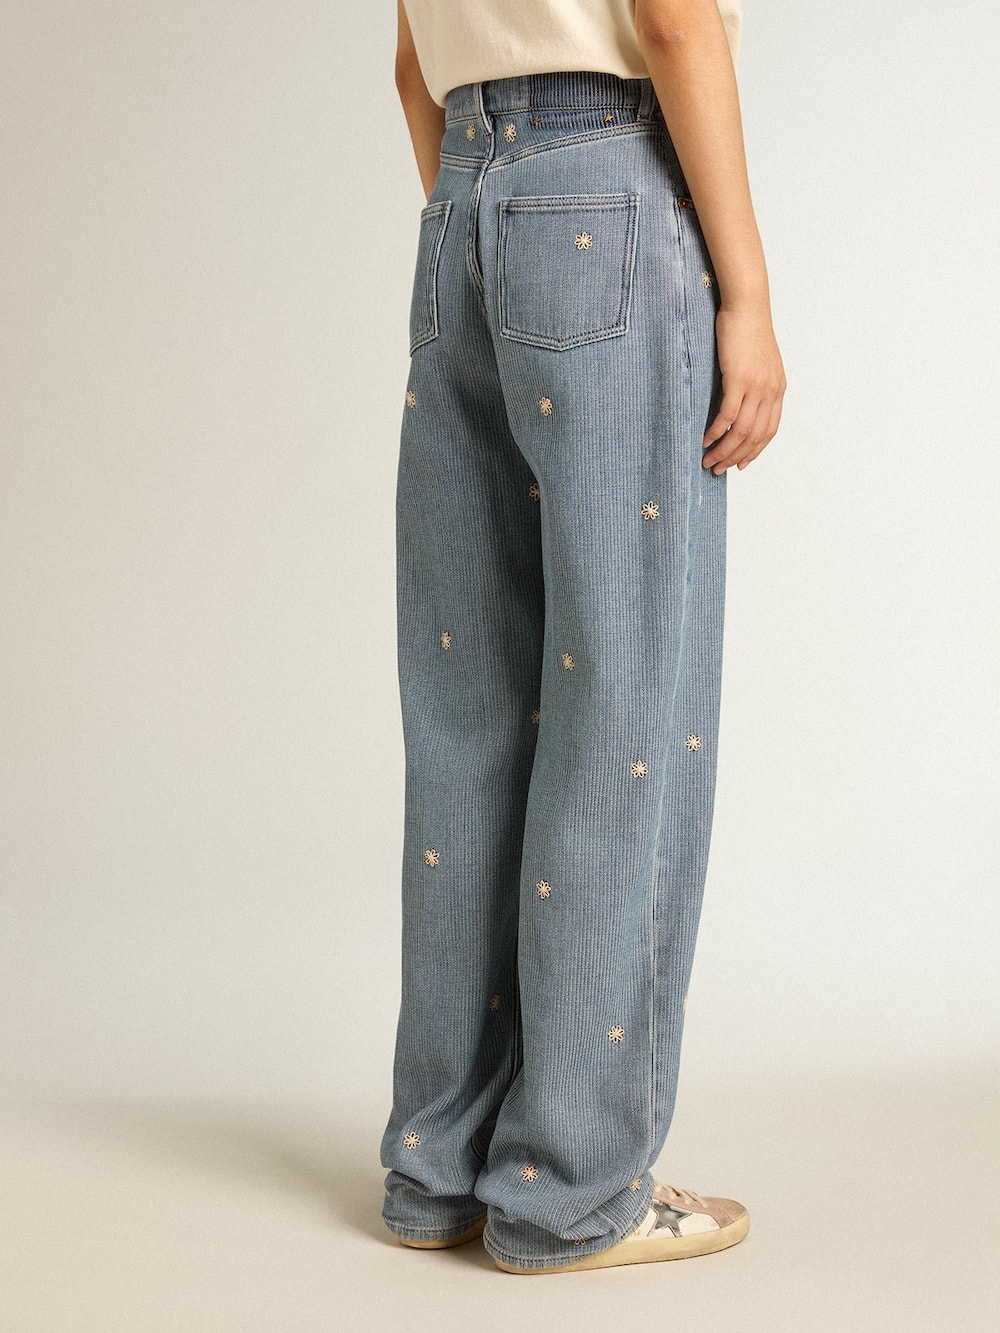 Golden Goose - Women’s cotton denim pants with floral embroidery in 